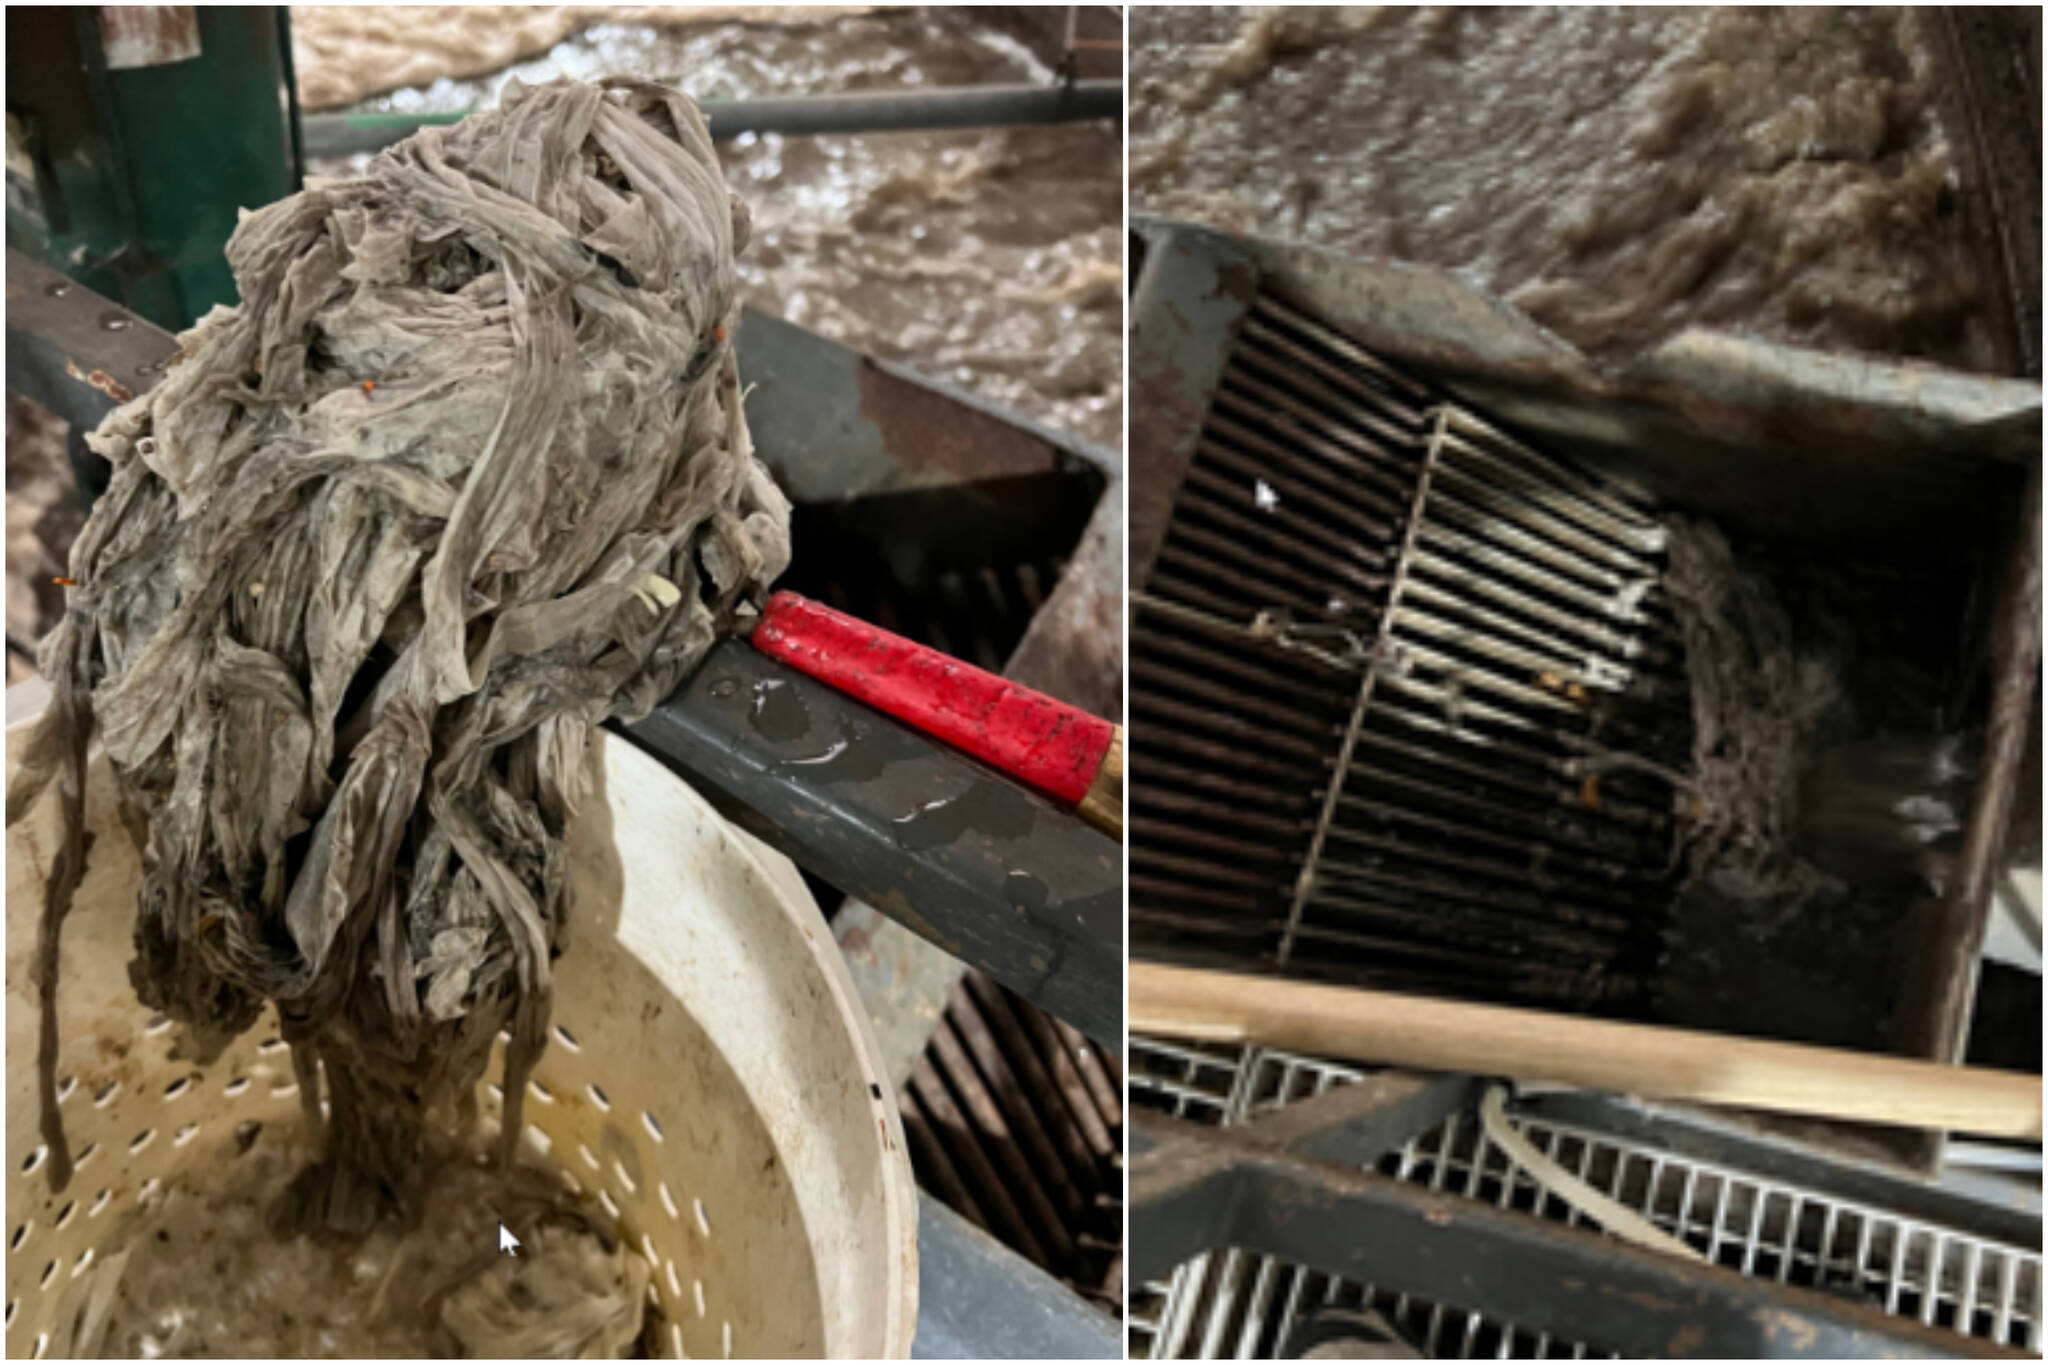 This composite image shows mopheads recently flushed down toilets in Juneau that are creating problems at the Auke Bay wastewater treatment facility. (Courtesy Photos / City and Borough of Juneau)